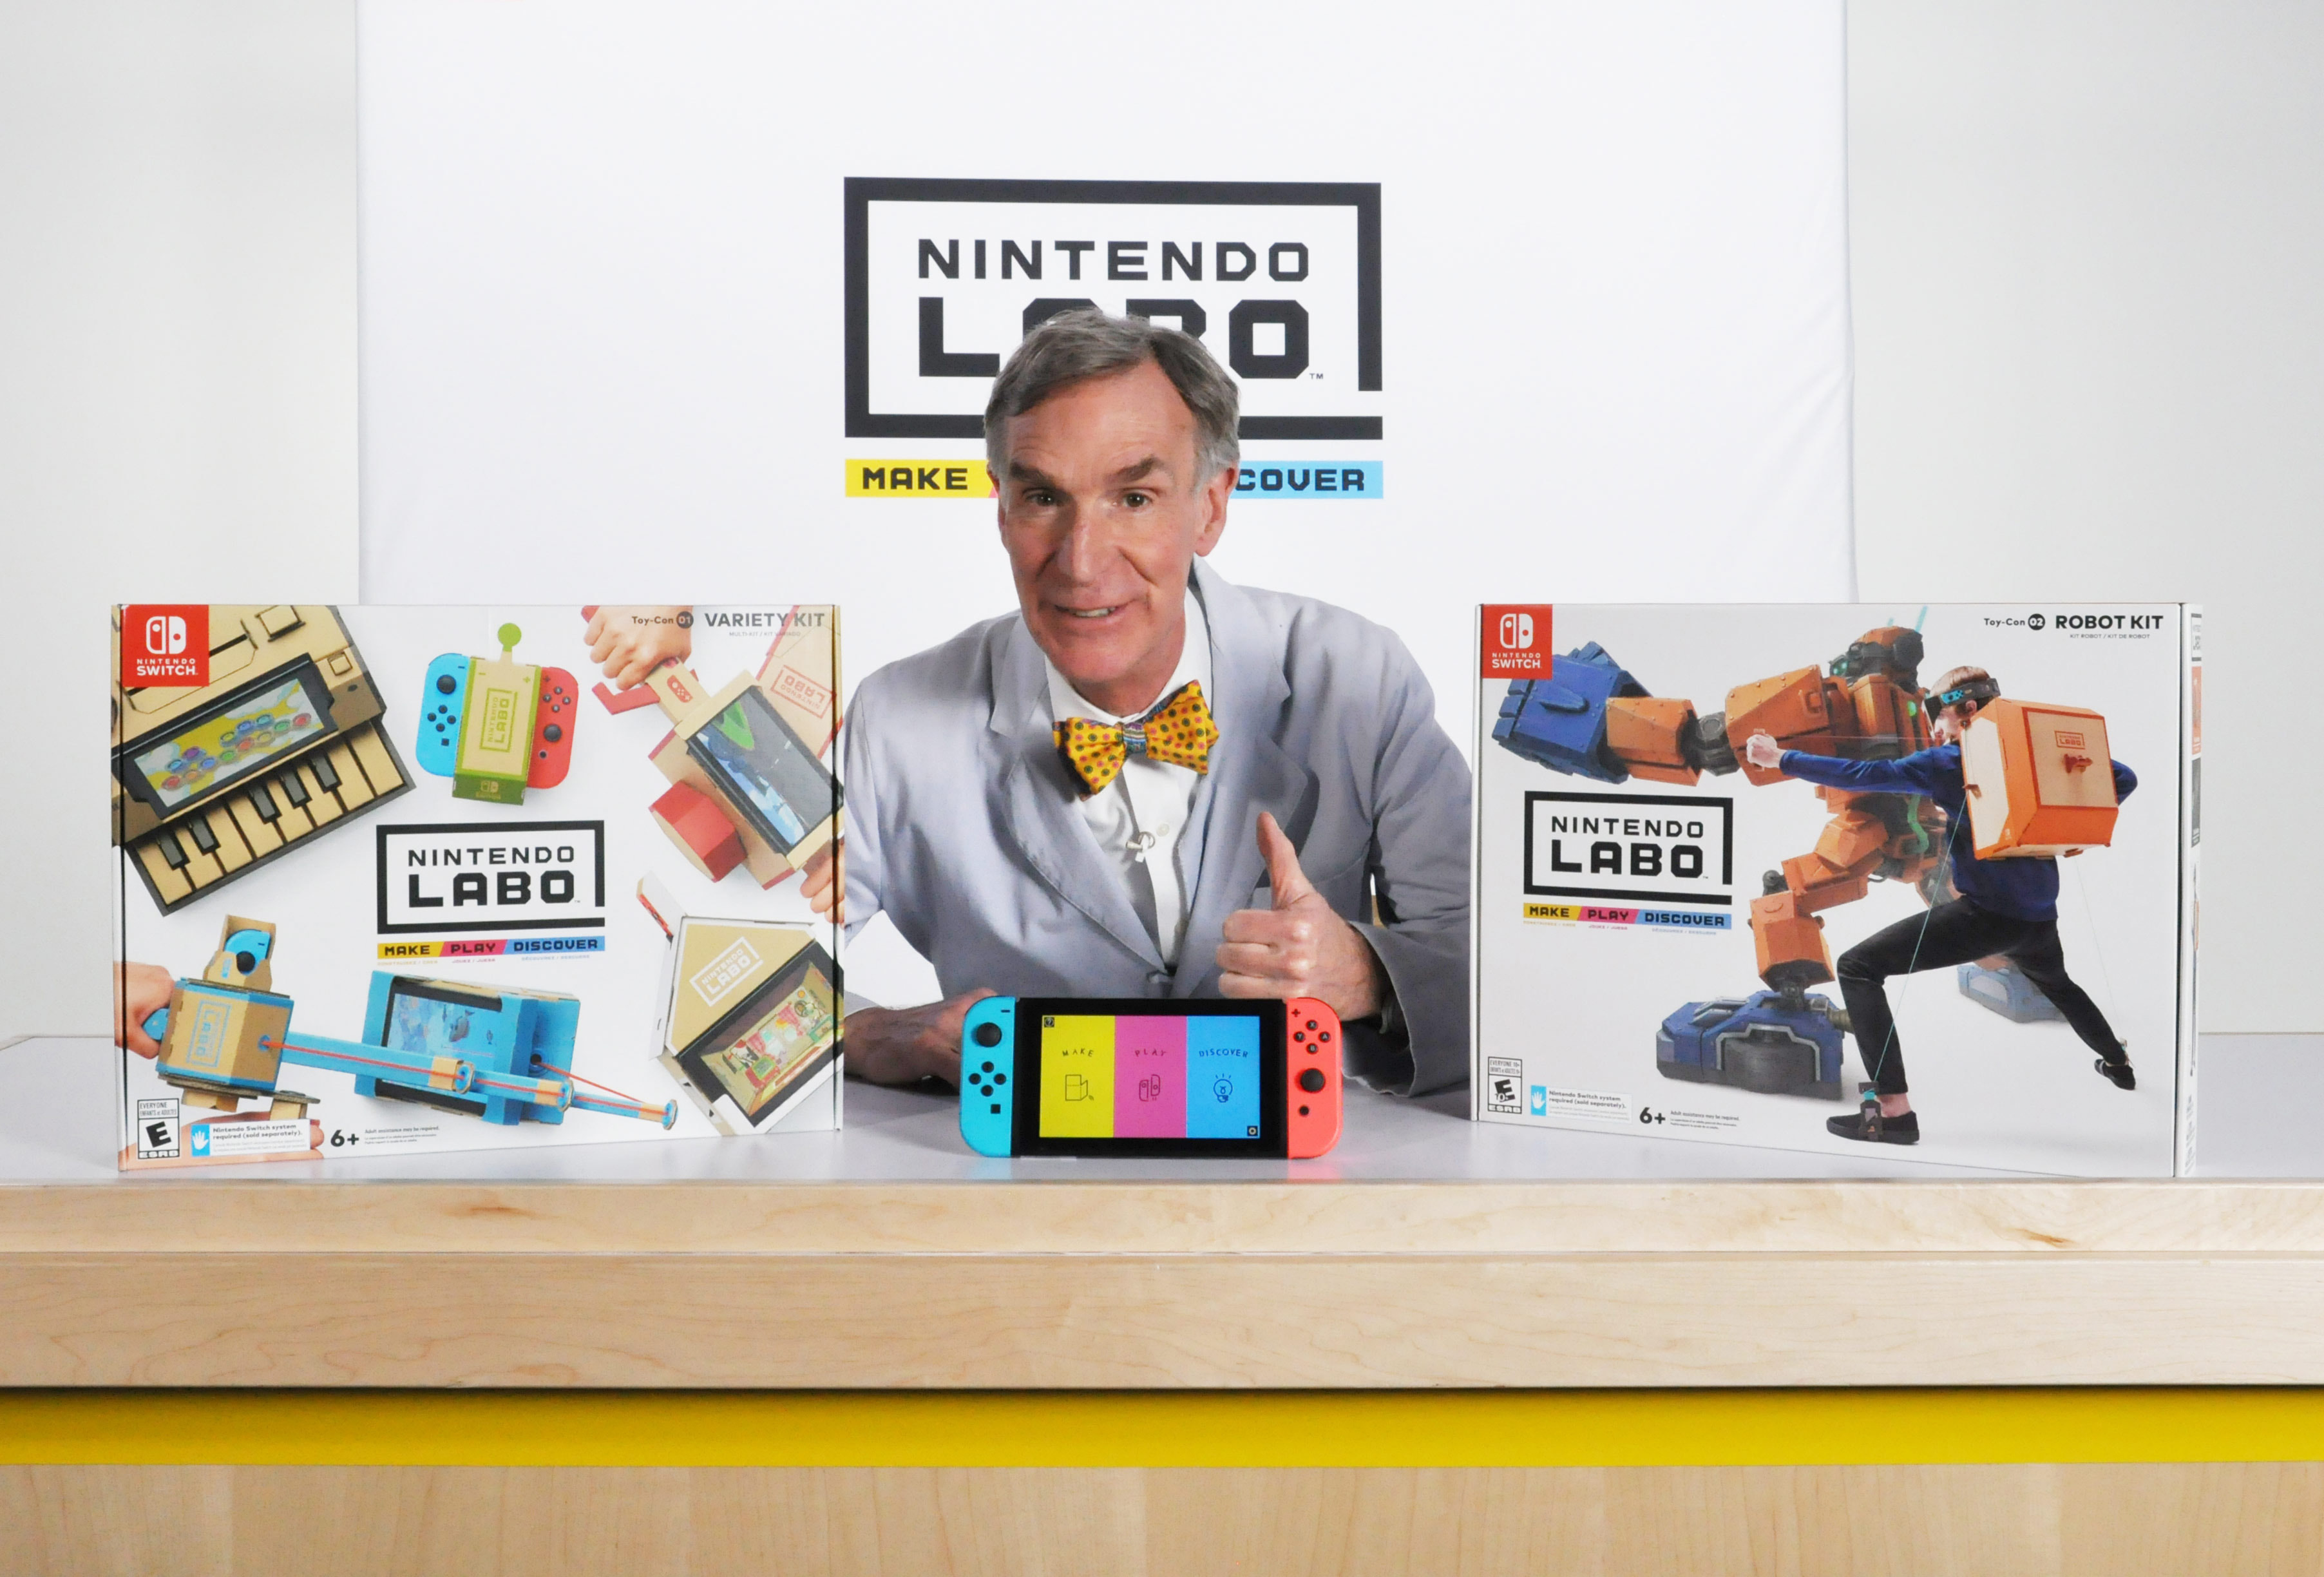 Unboxes New Possibilities to Make, Play and Discover with Launch of Nintendo Labo | Business Wire